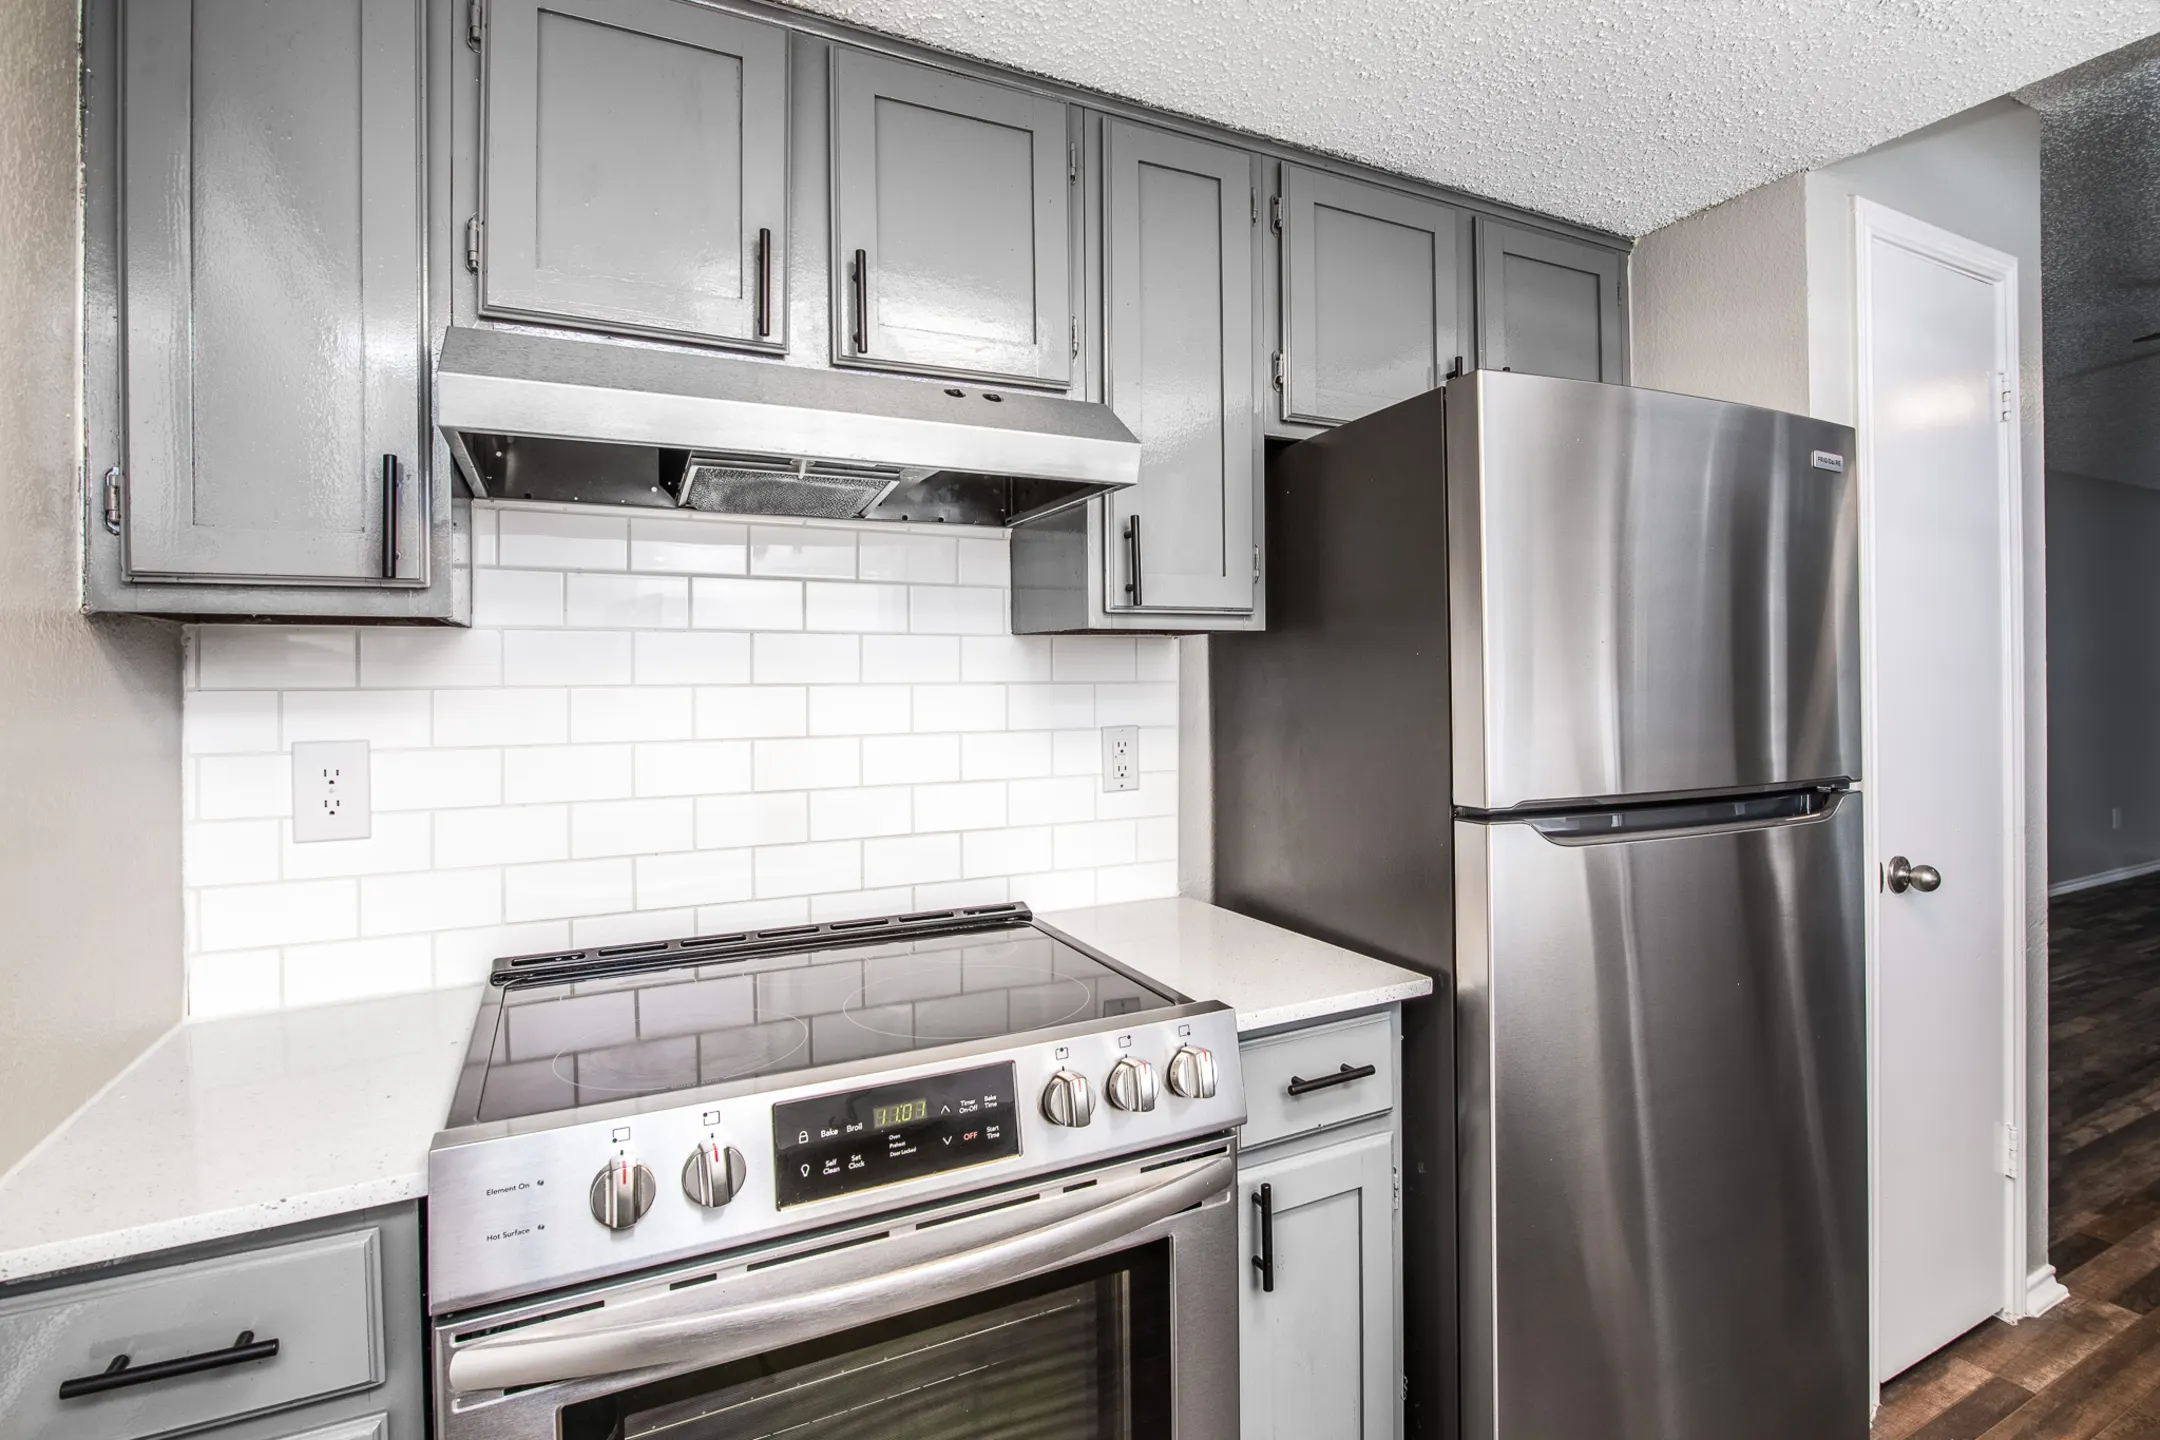 Kitchen - Wythe Apartment Homes - Irving, TX